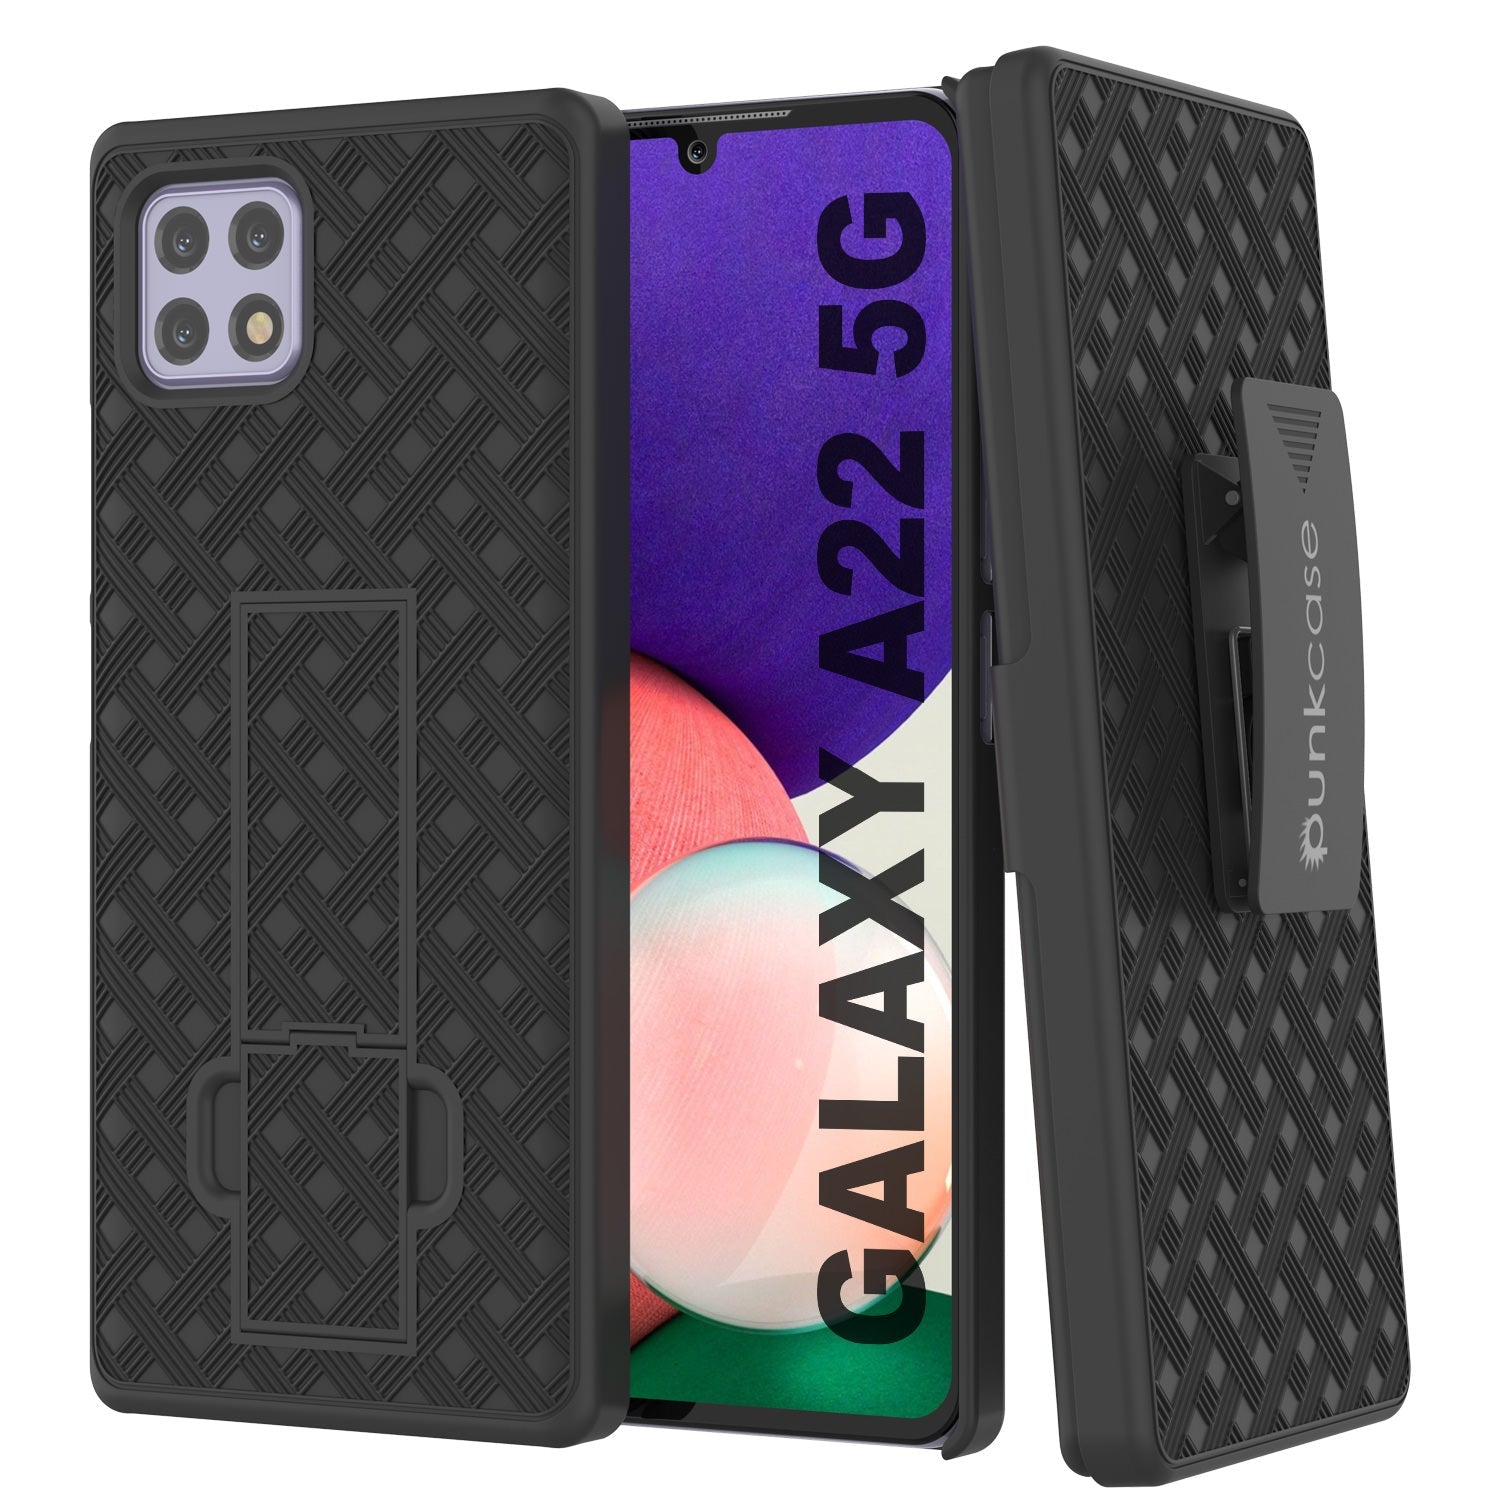 Punkcase Galaxy A22 5G Case With Screen Protector, Holster Belt Clip [Black]